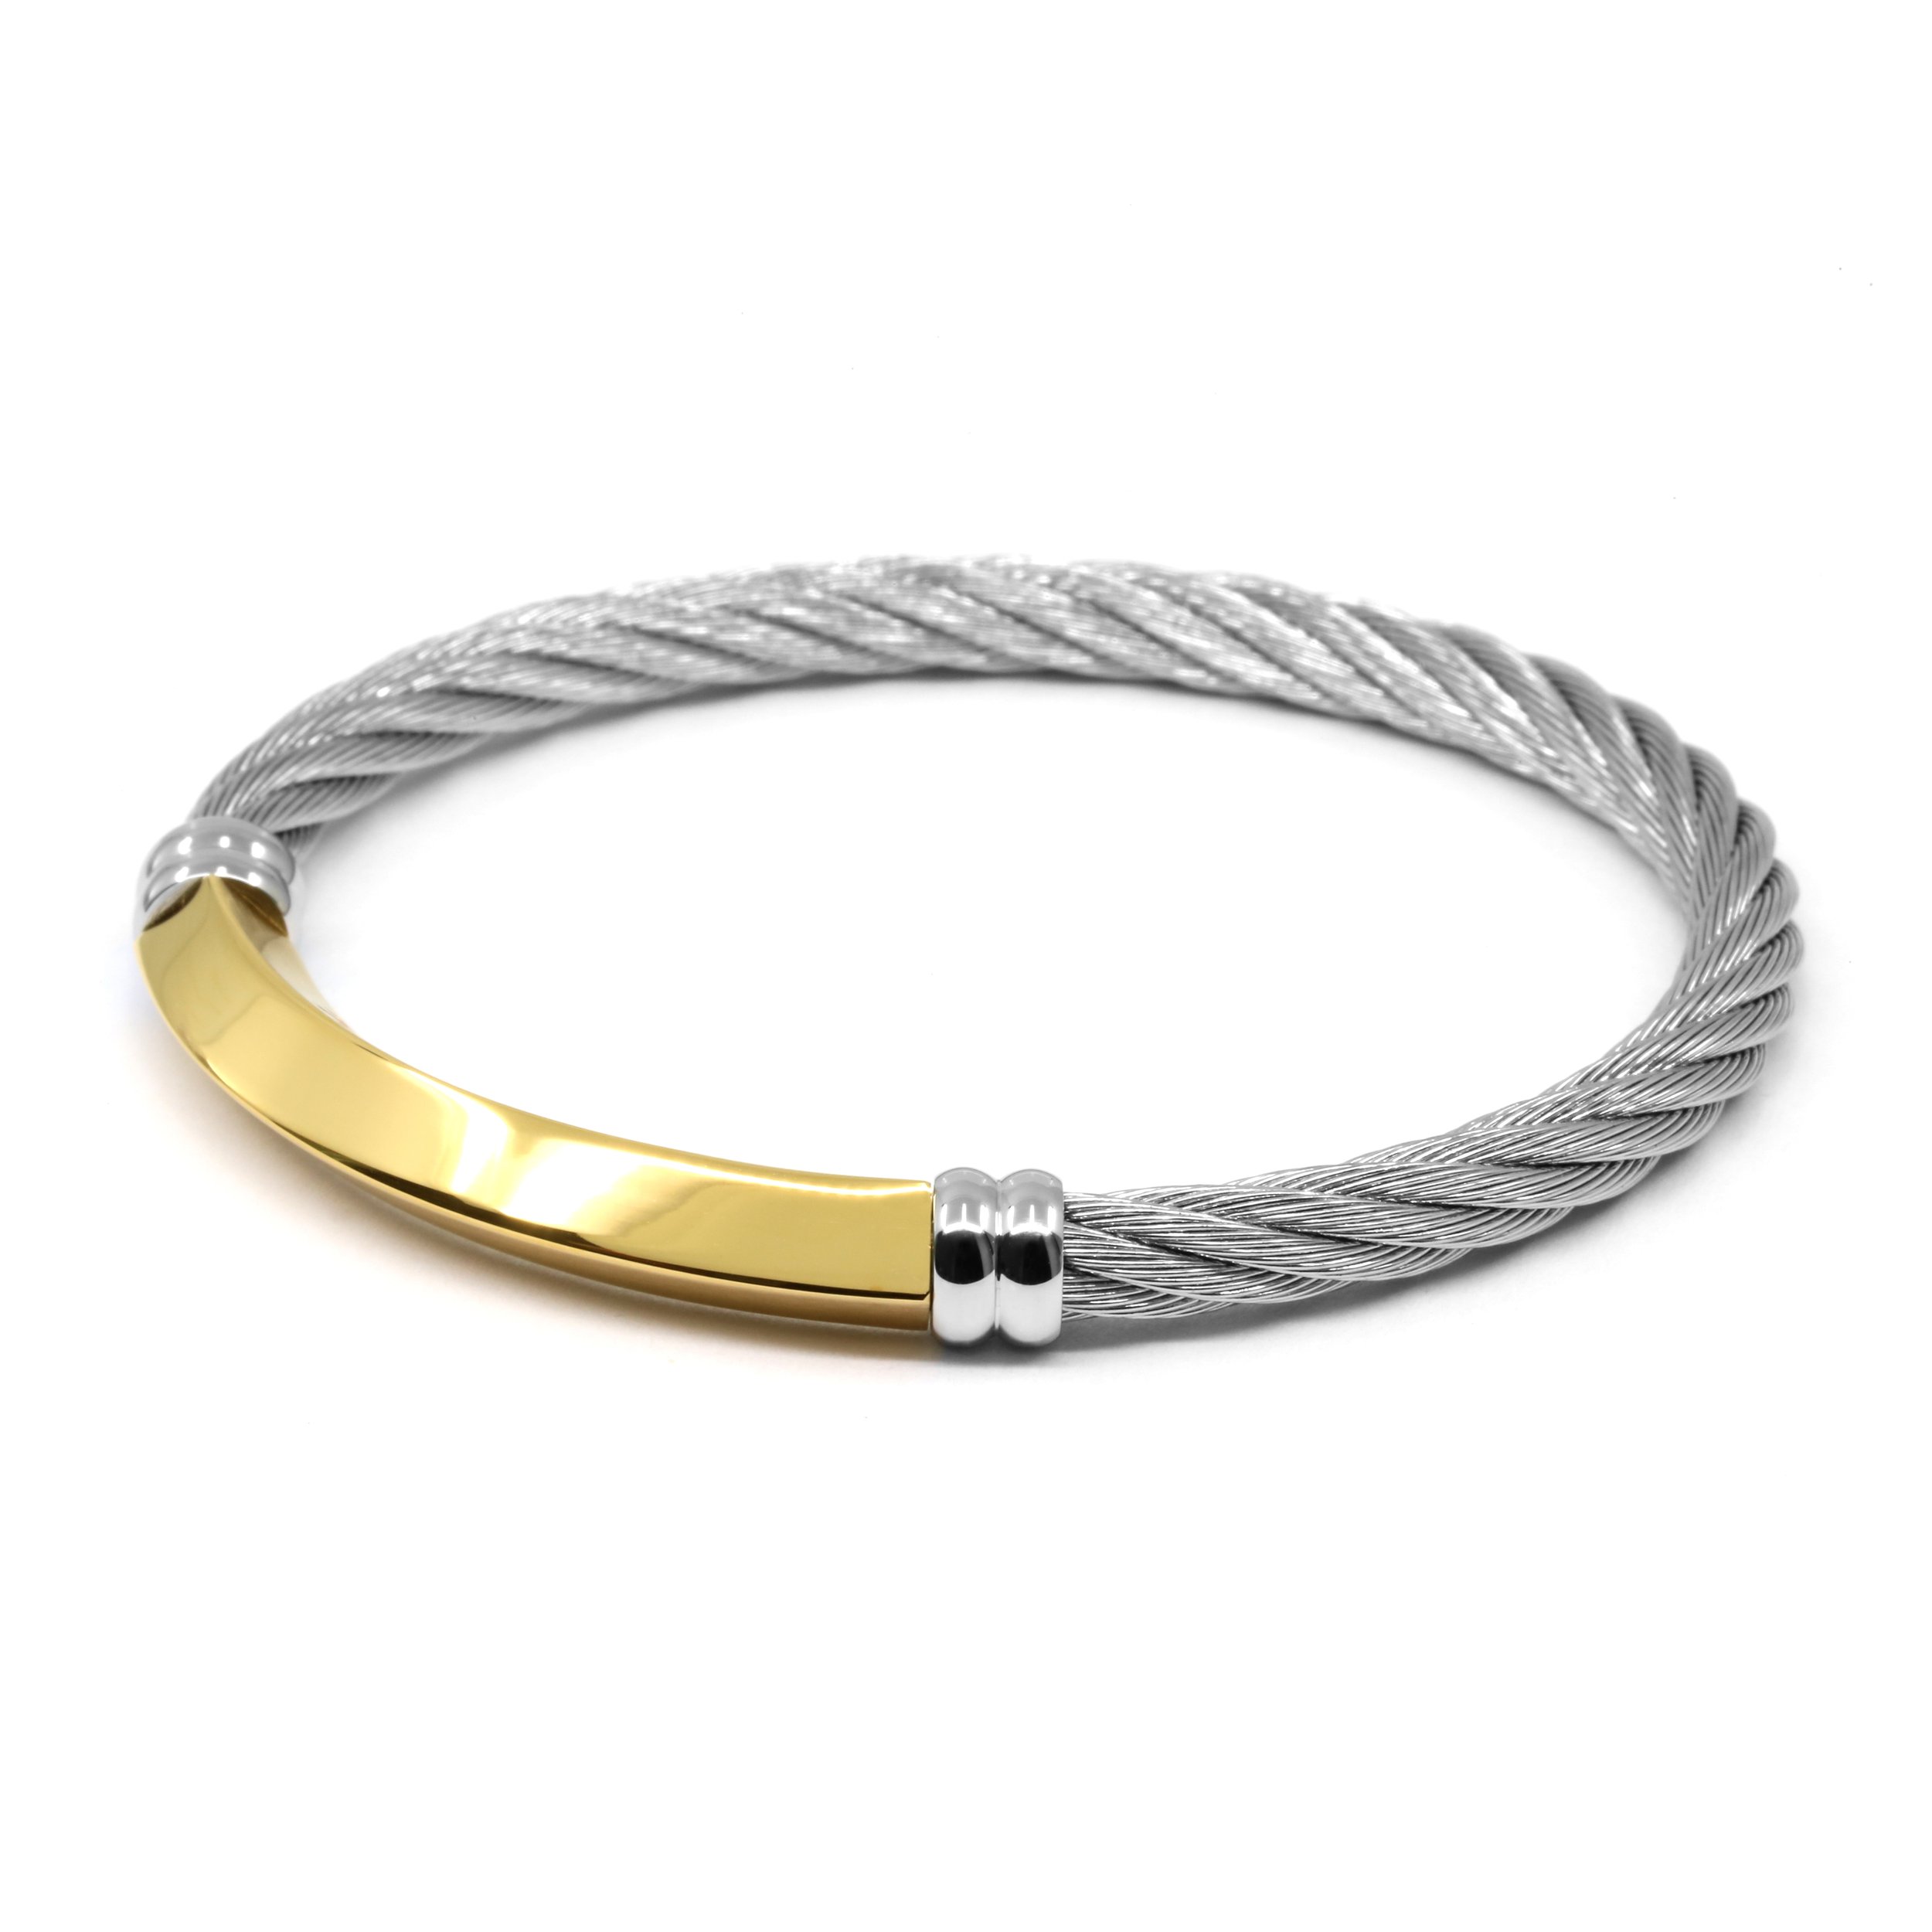 Better Half Bangle - Yellow Gold Decor, Stainless Steel Cable.jpg